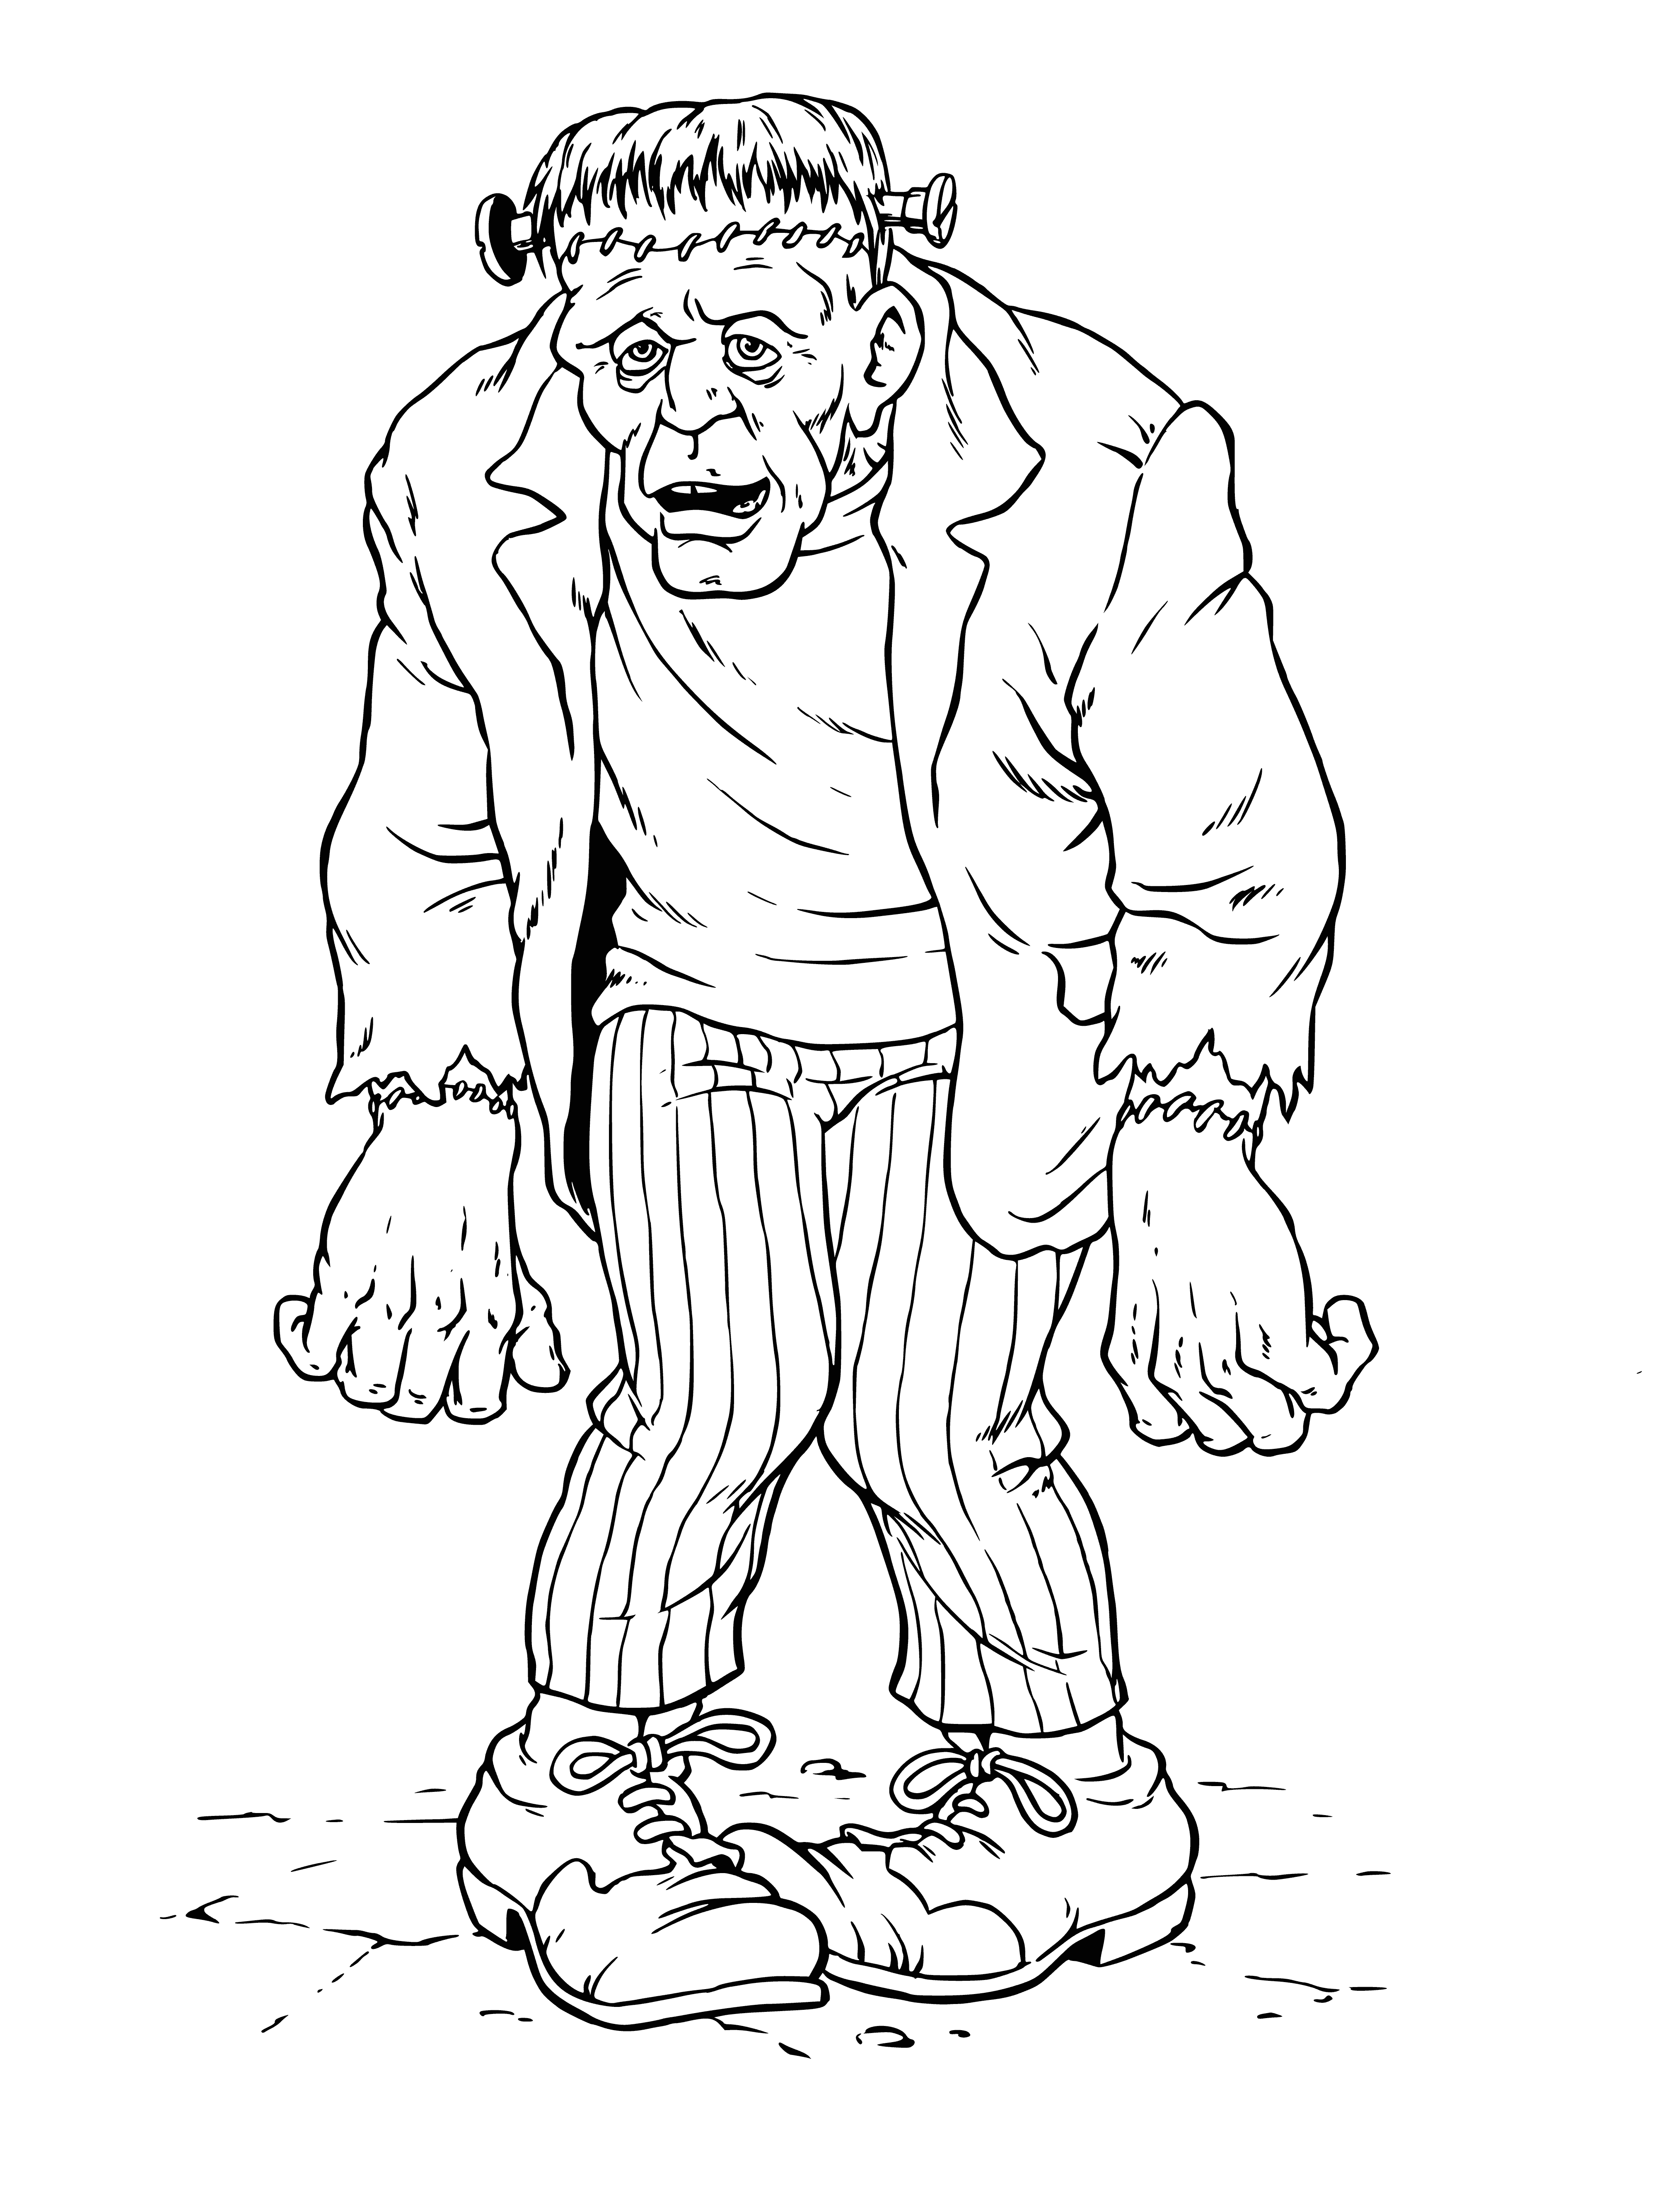 Frankenstein coloring page